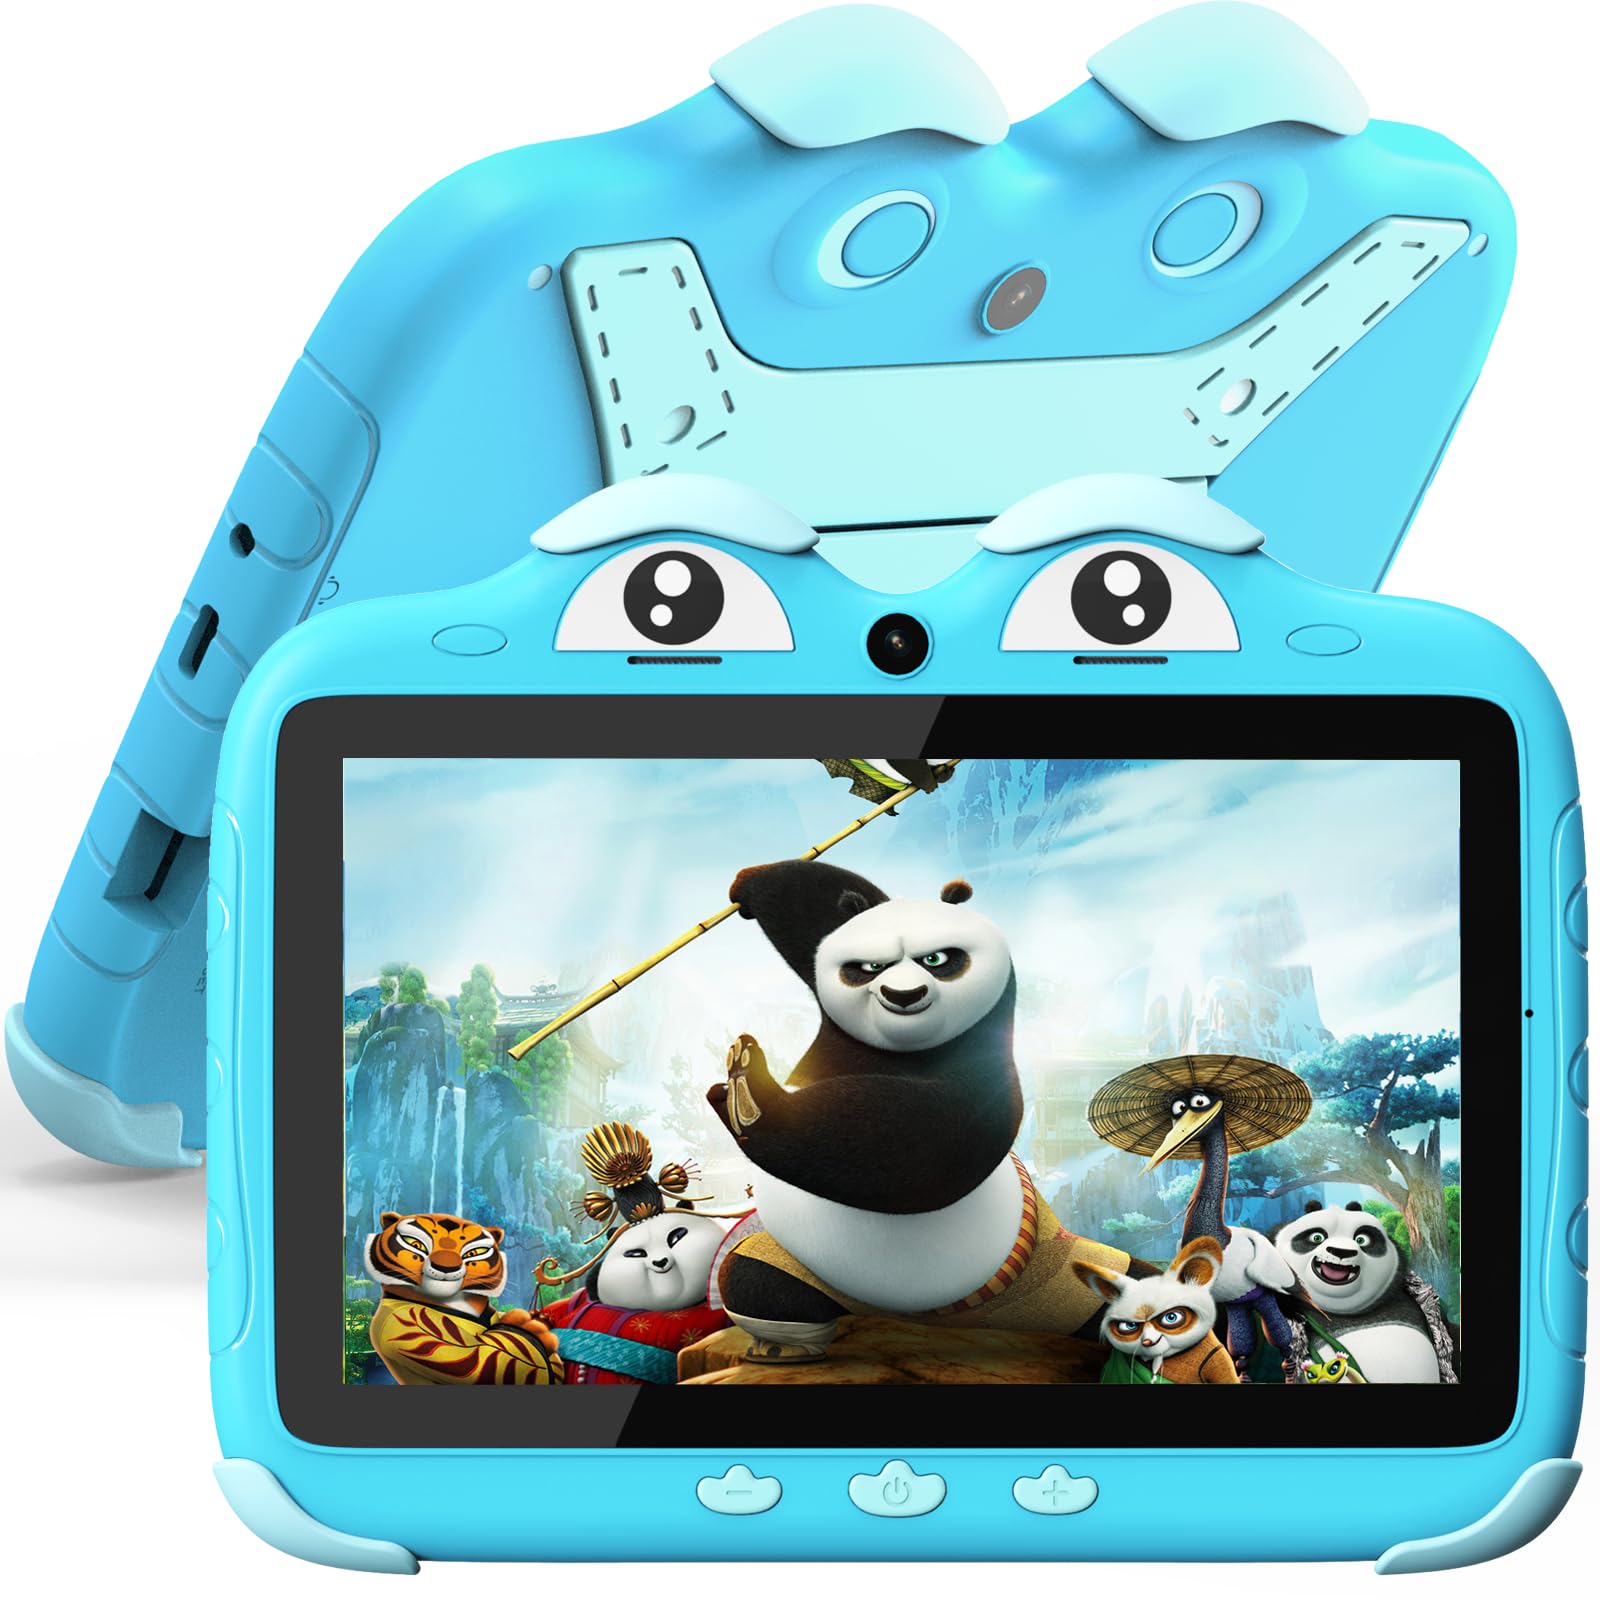 YINOCHE Kids Tablet 7 inch Toddler Tablet for Kids Android Tablet for Toddlers Kids Learning Tablet WiFi Children's Tablet with Parental Control 32G Shockproof Case Support YouTube Netflix